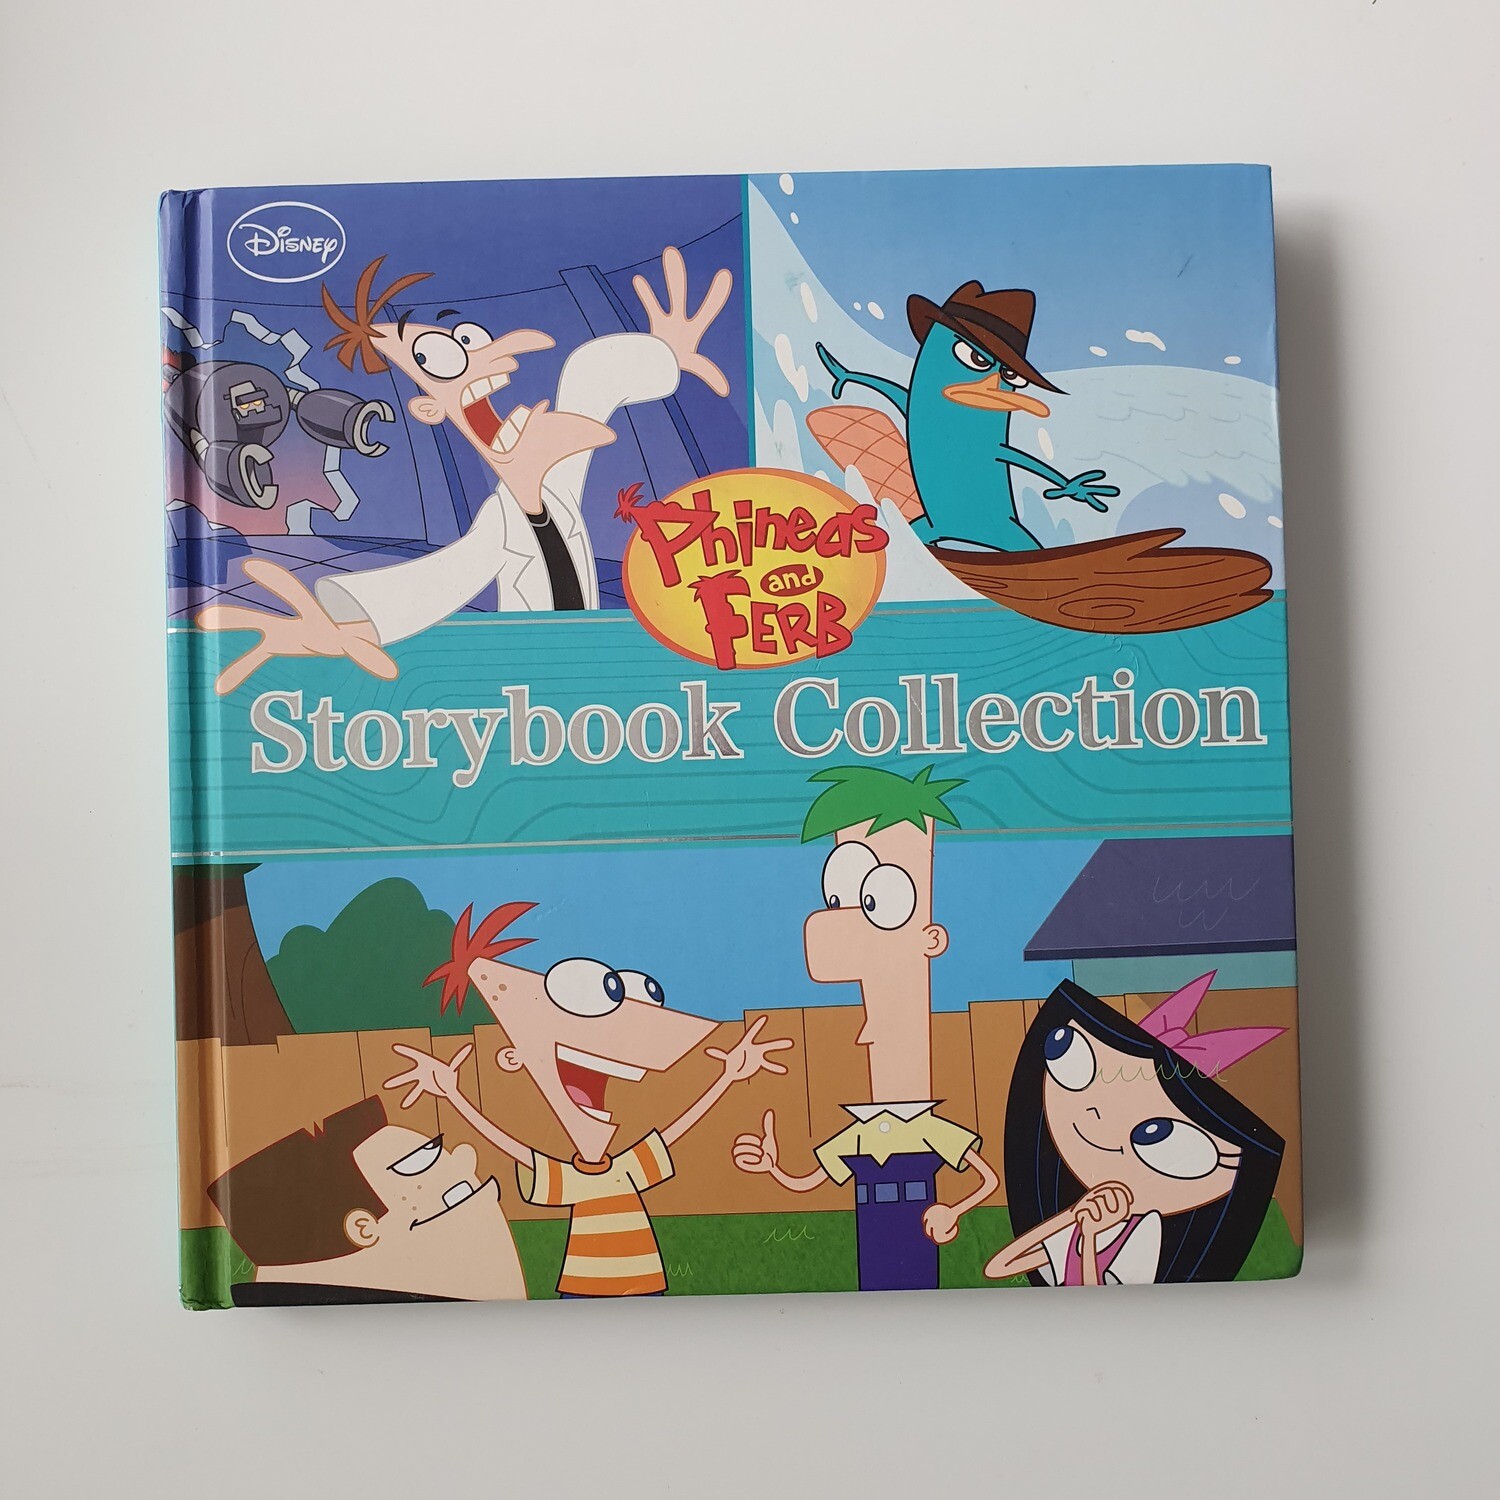 Phineas and Ferb Notebook